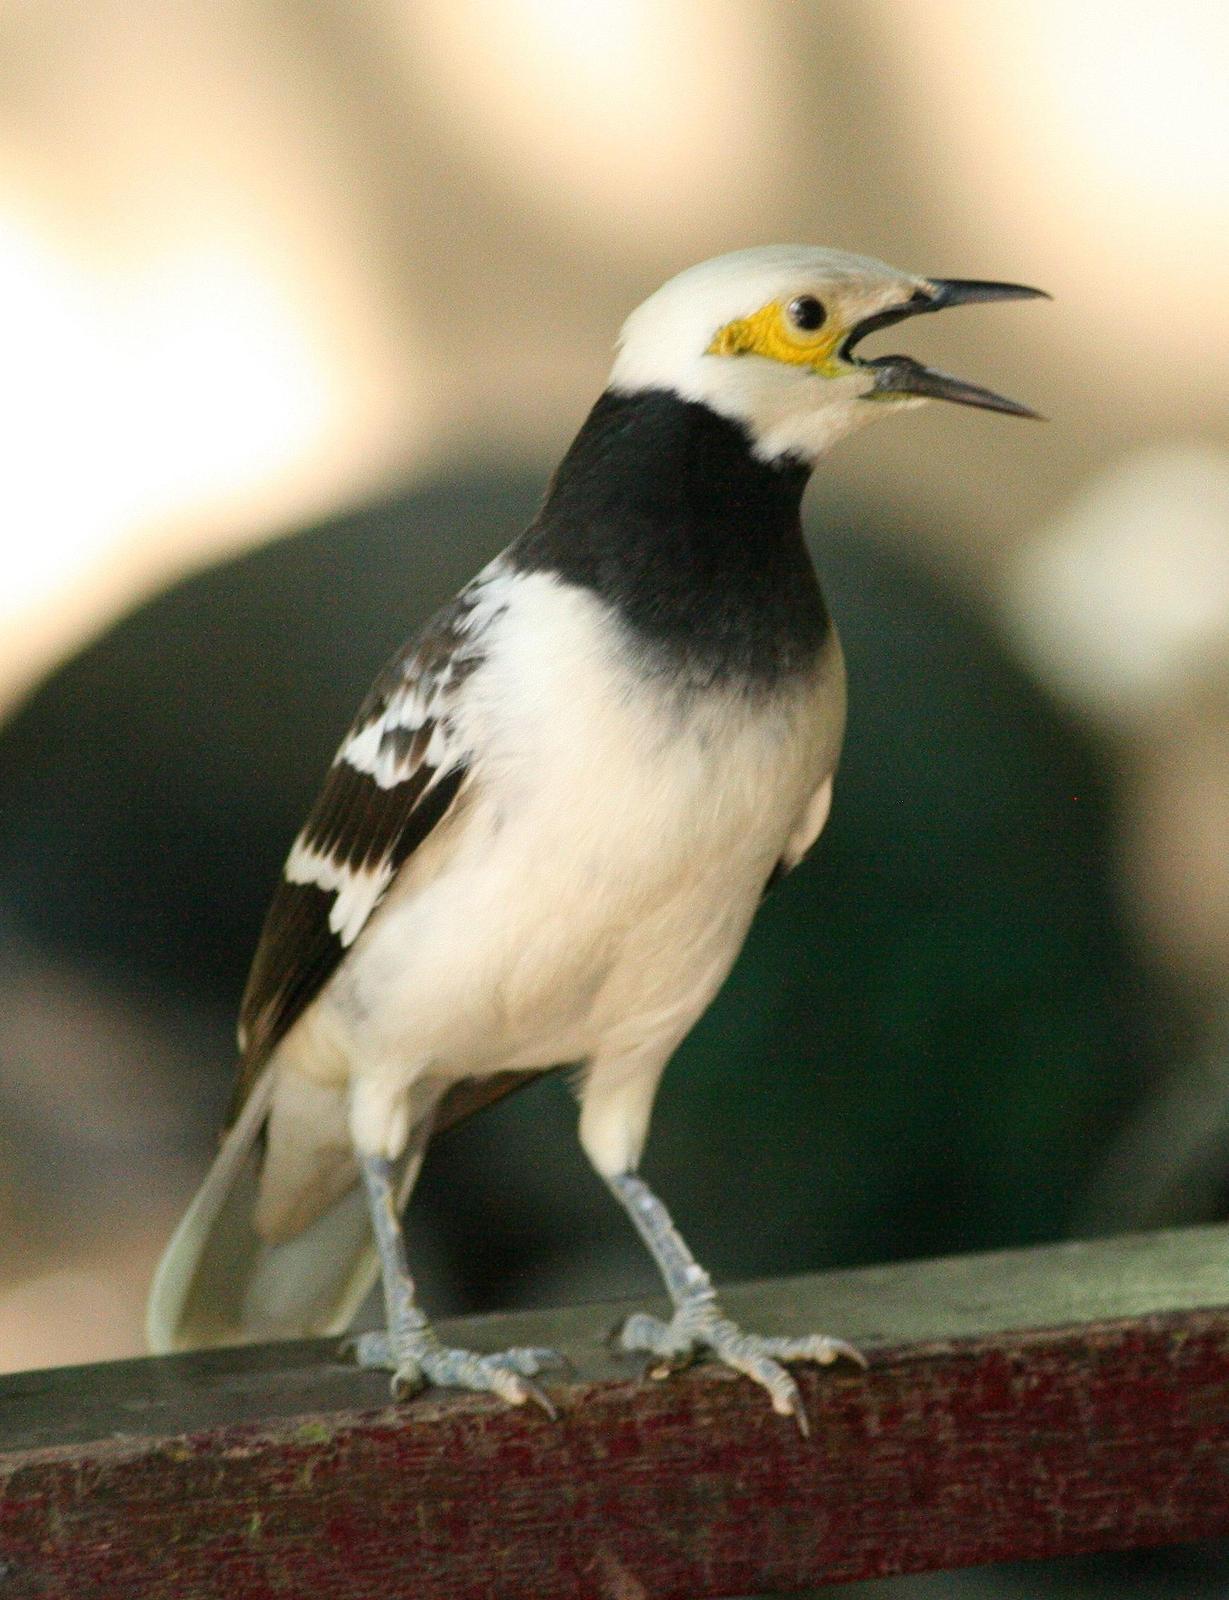 Black-collared Starling Photo by Lee Harding